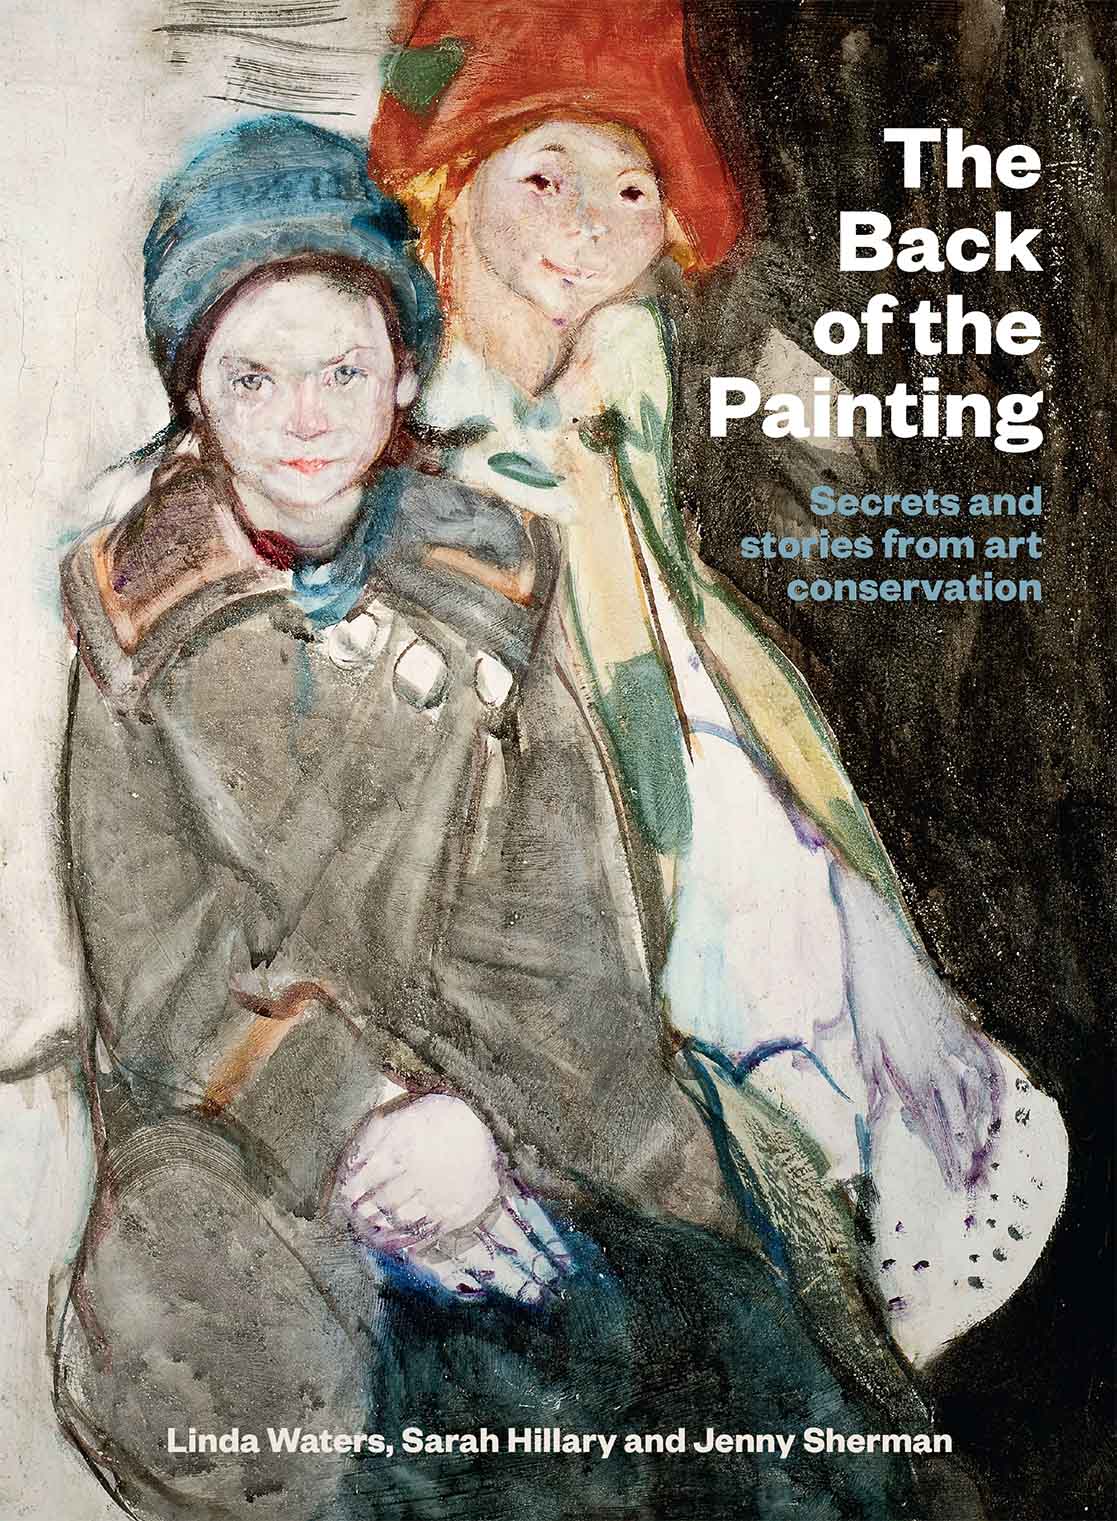 Book event: The Back of the Painting